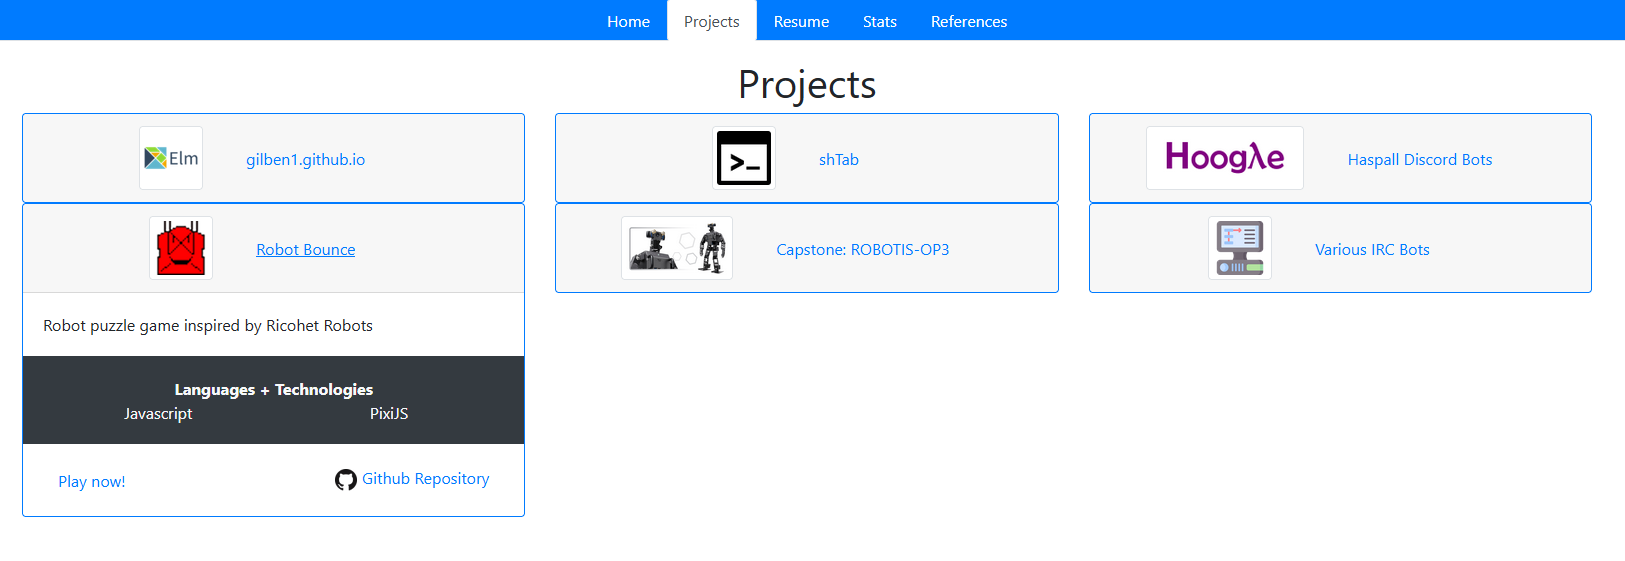 Fig. 2 - Projects Page